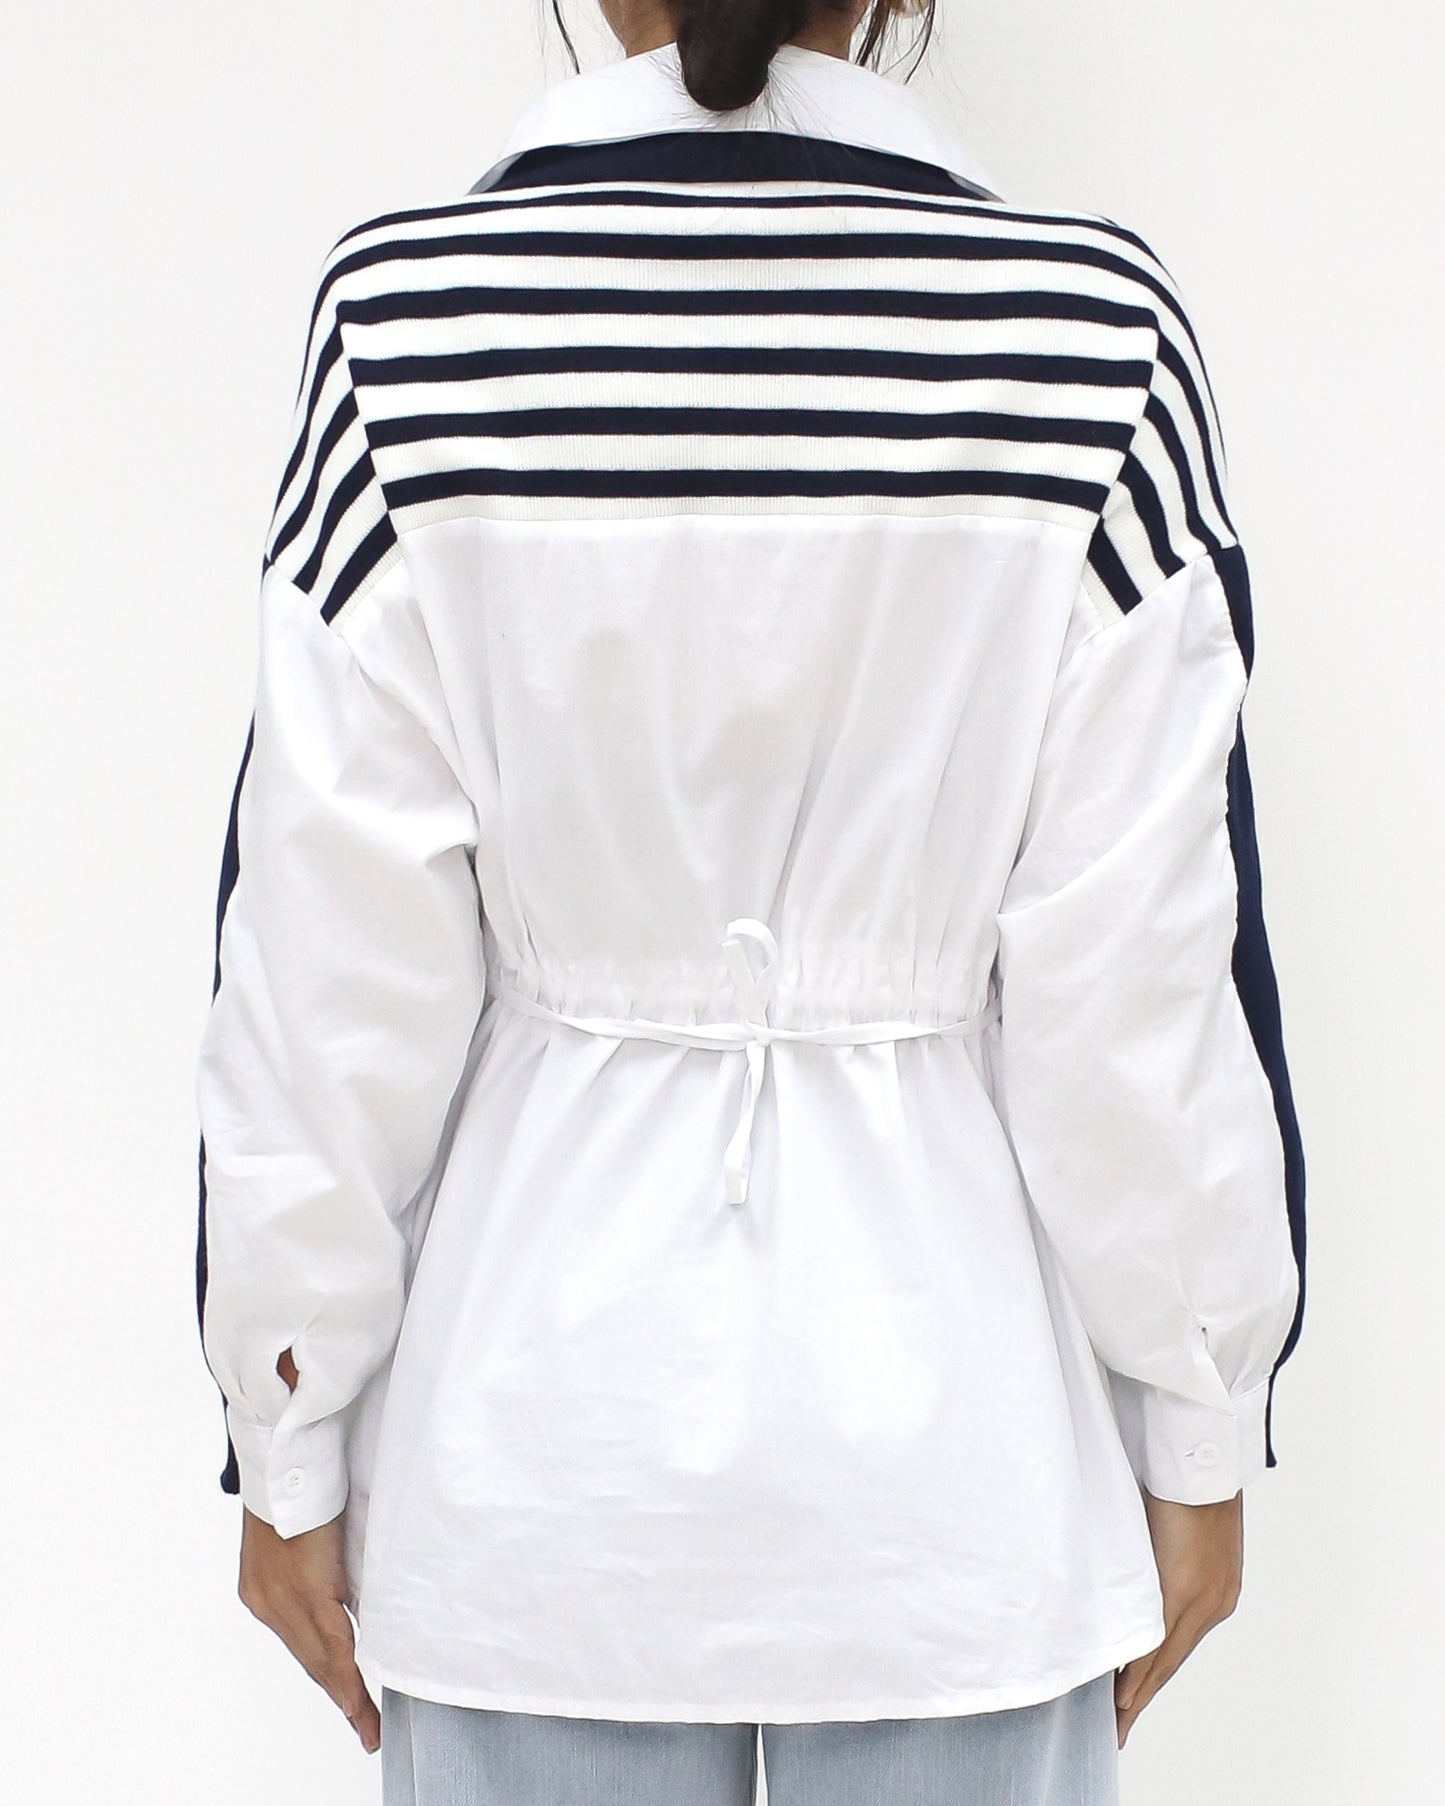 navy & ivory knitted contrast shirt *pre-order*